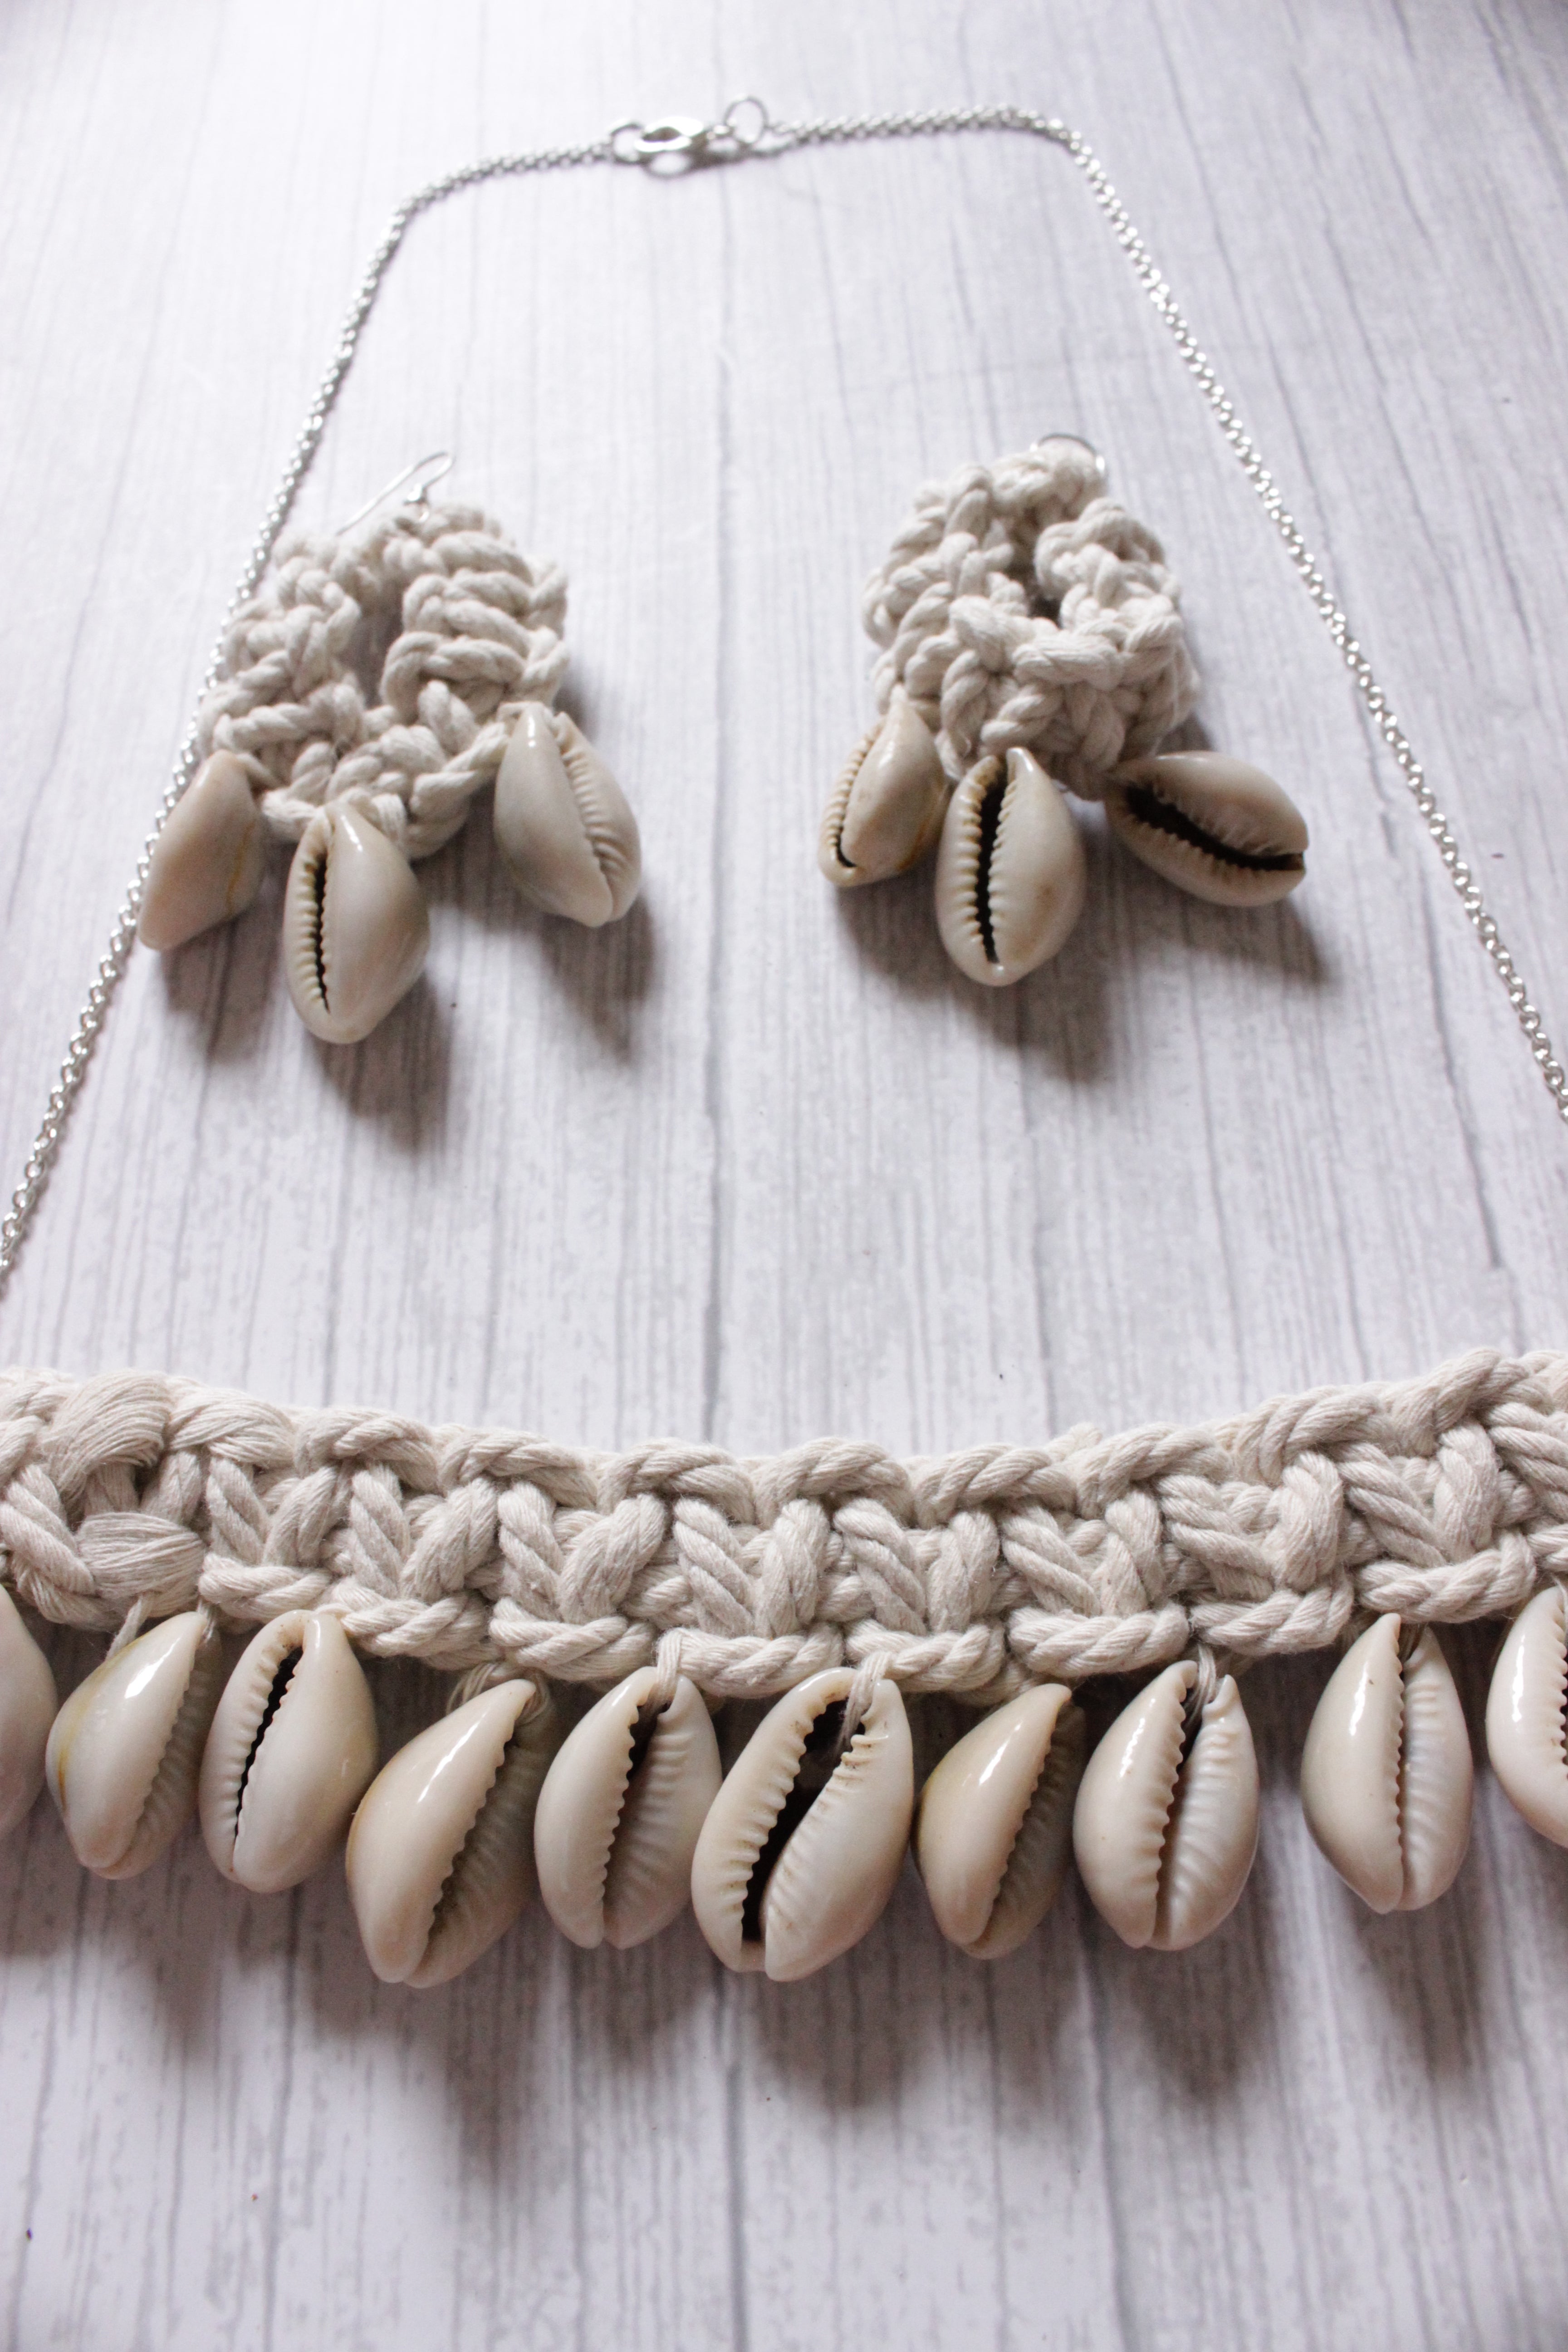 Shells Embellished Braided Macrame Threads Long Silver Chain Necklace Set